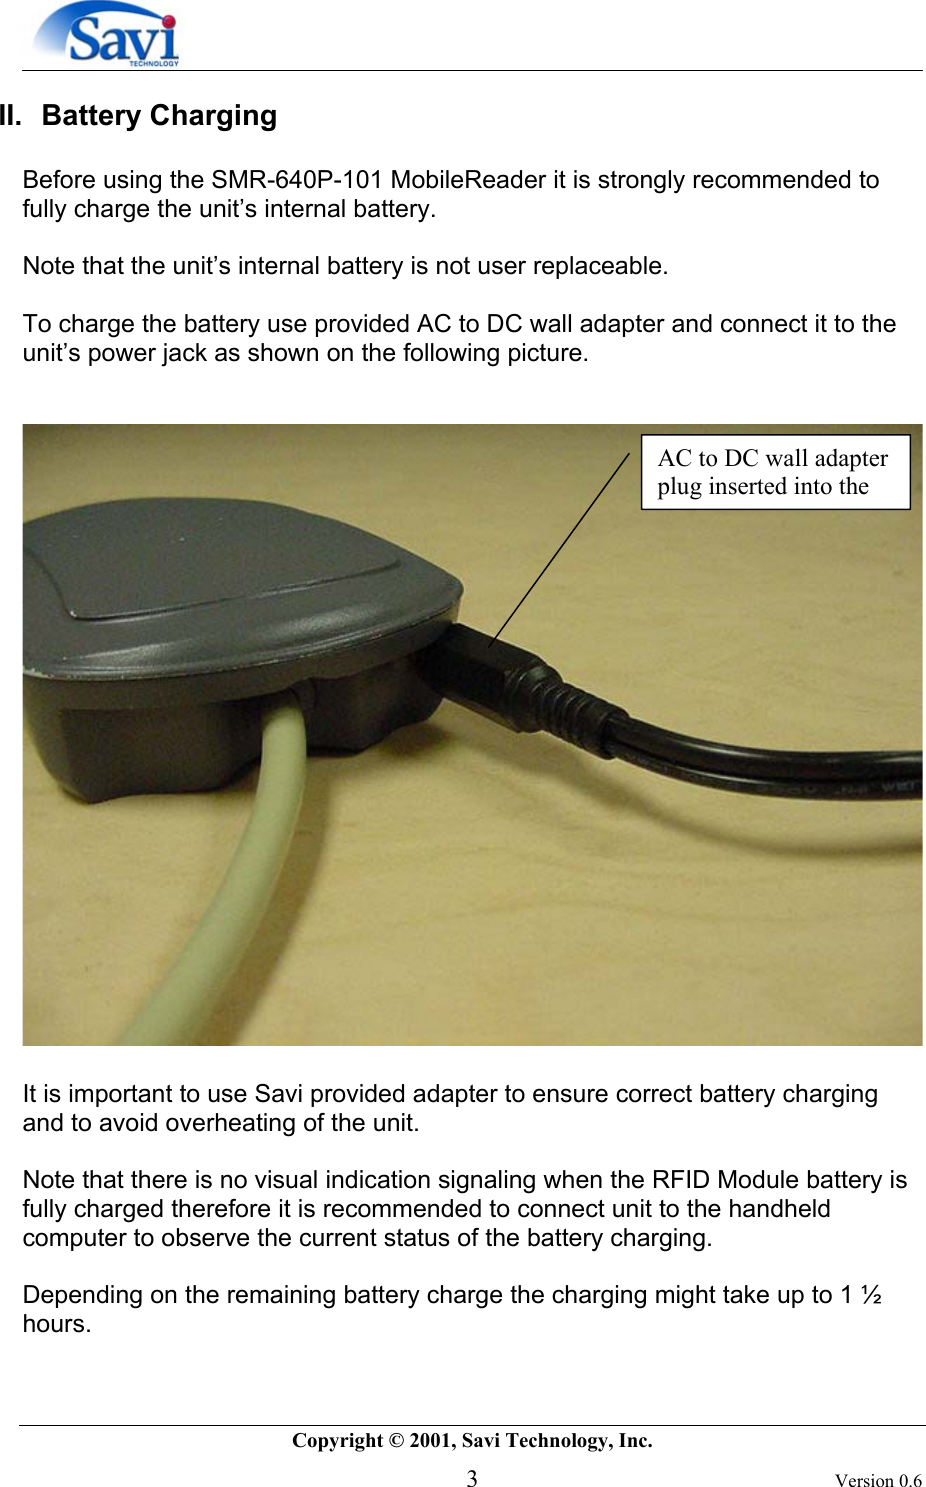        Copyright © 2001, Savi Technology, Inc.   3 Version 0.6 II. Battery Charging  Before using the SMR-640P-101 MobileReader it is strongly recommended to fully charge the unit’s internal battery.   Note that the unit’s internal battery is not user replaceable.   To charge the battery use provided AC to DC wall adapter and connect it to the unit’s power jack as shown on the following picture.      It is important to use Savi provided adapter to ensure correct battery charging and to avoid overheating of the unit.  Note that there is no visual indication signaling when the RFID Module battery is fully charged therefore it is recommended to connect unit to the handheld computer to observe the current status of the battery charging.   Depending on the remaining battery charge the charging might take up to 1 ½ hours. AC to DC wall adapter plug inserted into the 